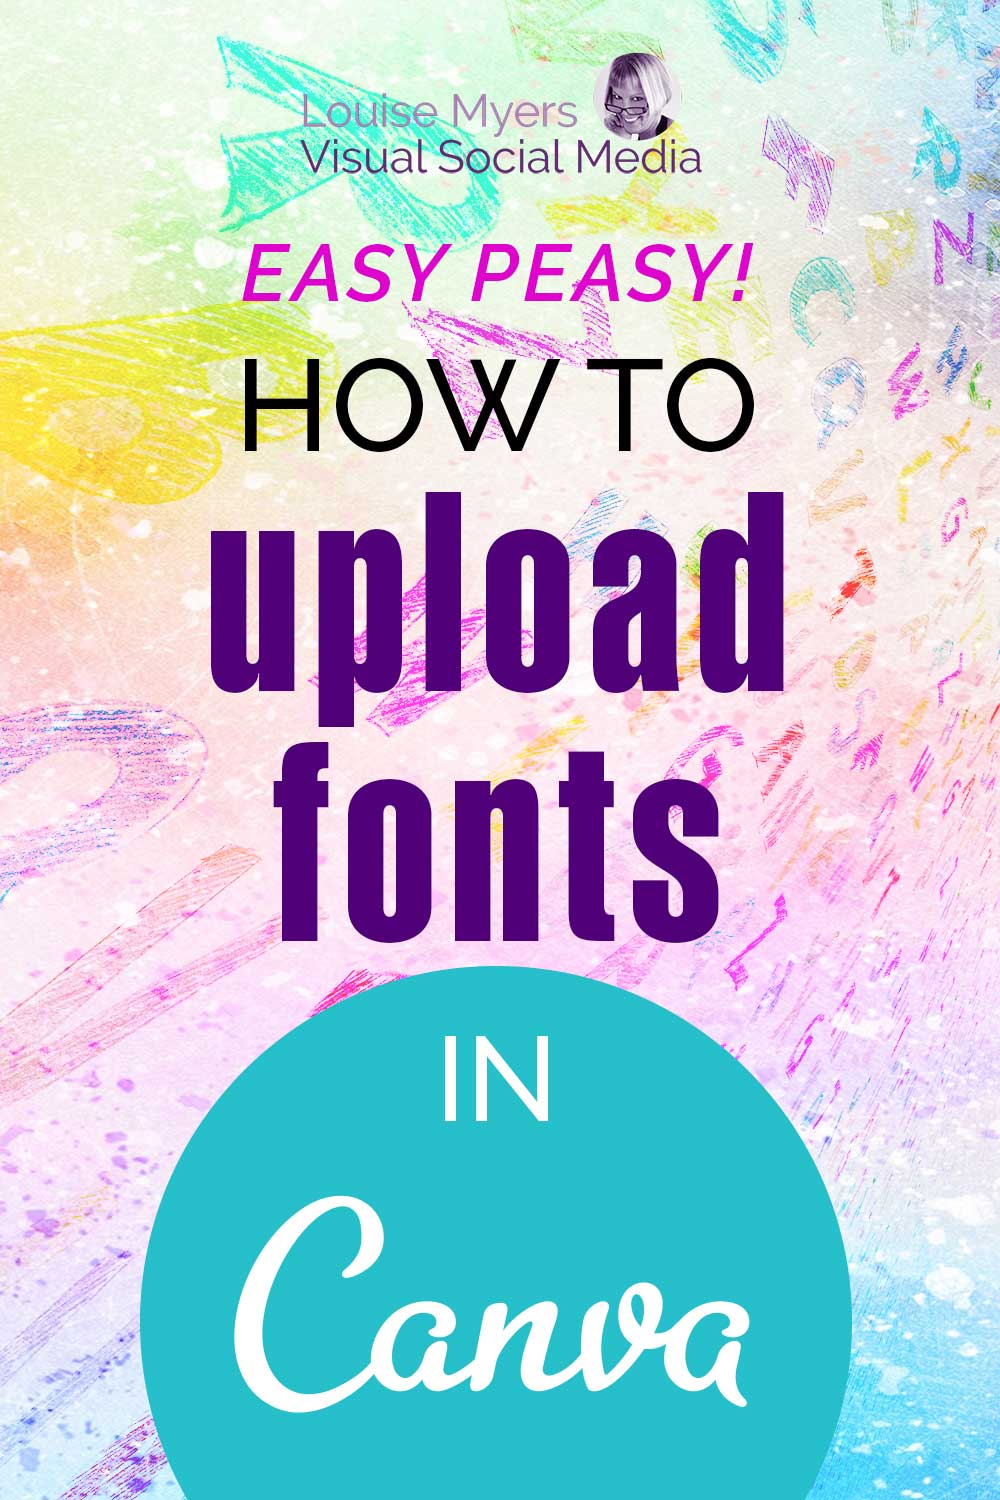 pinnable image with pastel background of letters says how to upload fonts in canva.